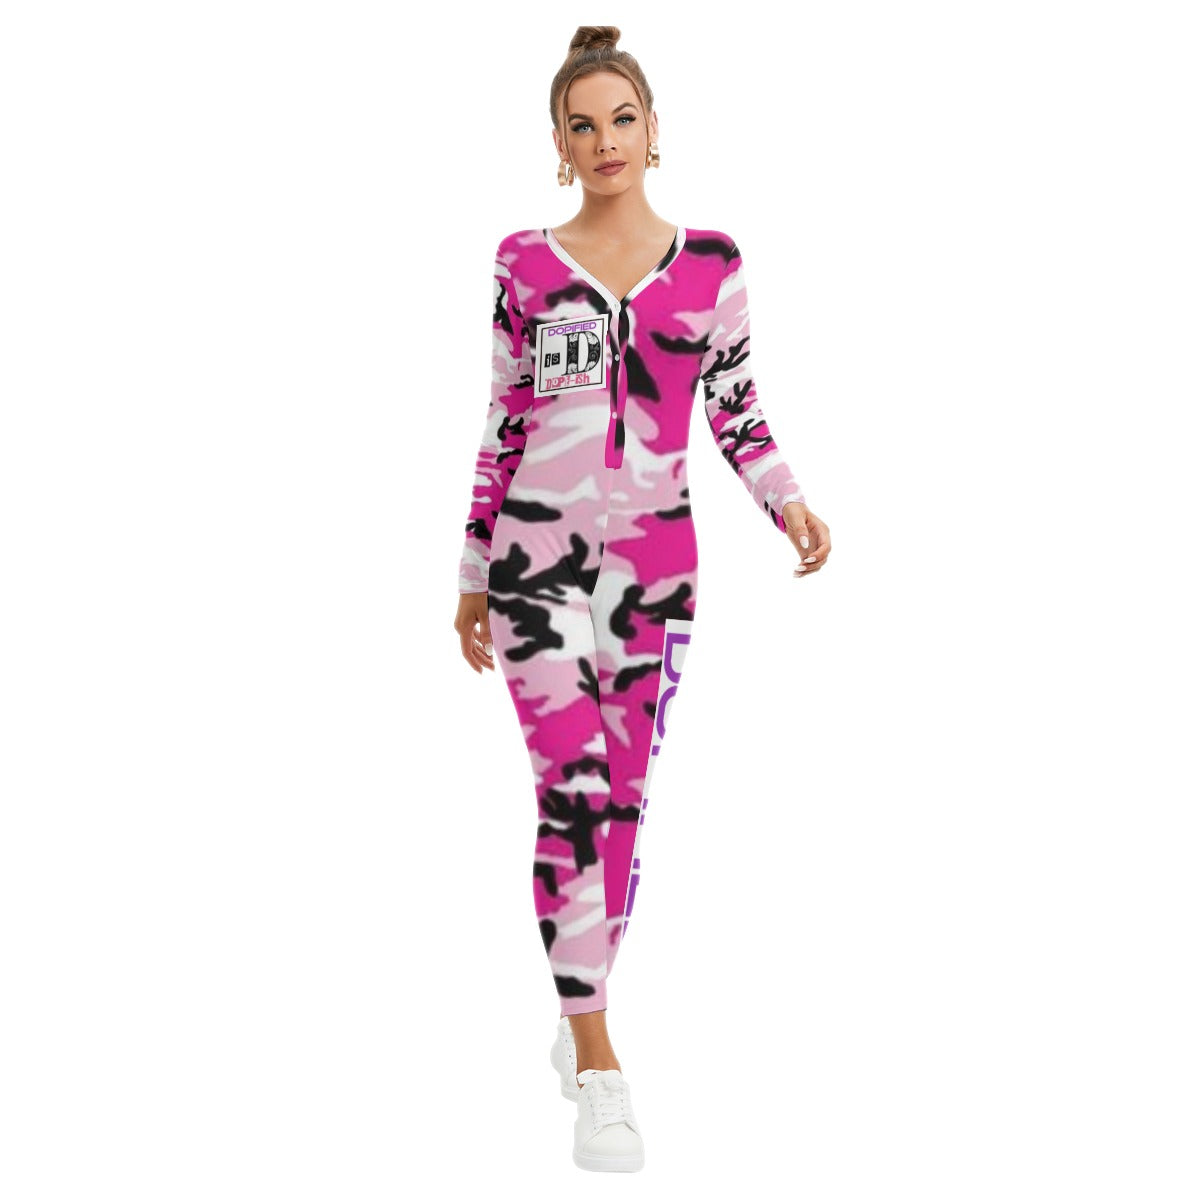 LADY DOPIFIED Women's Plunging Neck Pajama Jumpsuit